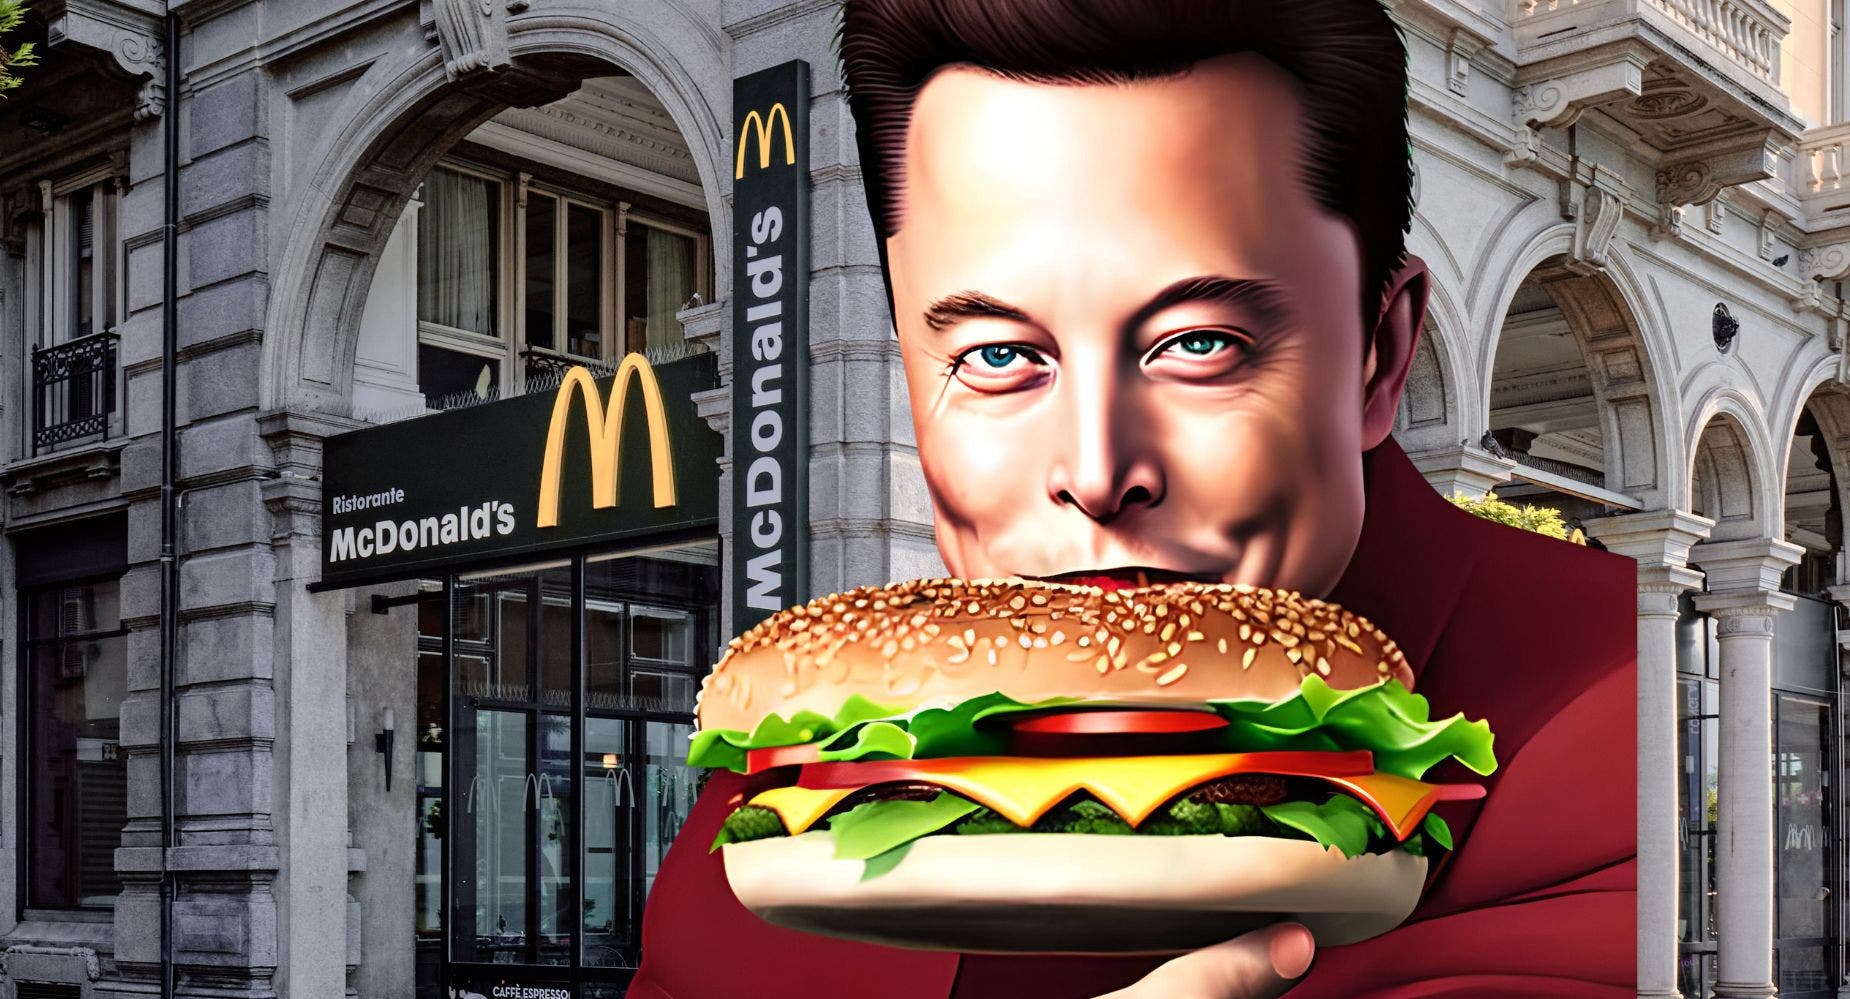 If You Invested $100 In Dogecoin When Elon Musk Offered To Eat A Happy Meal On TV, Here's How Much You'd Have Now